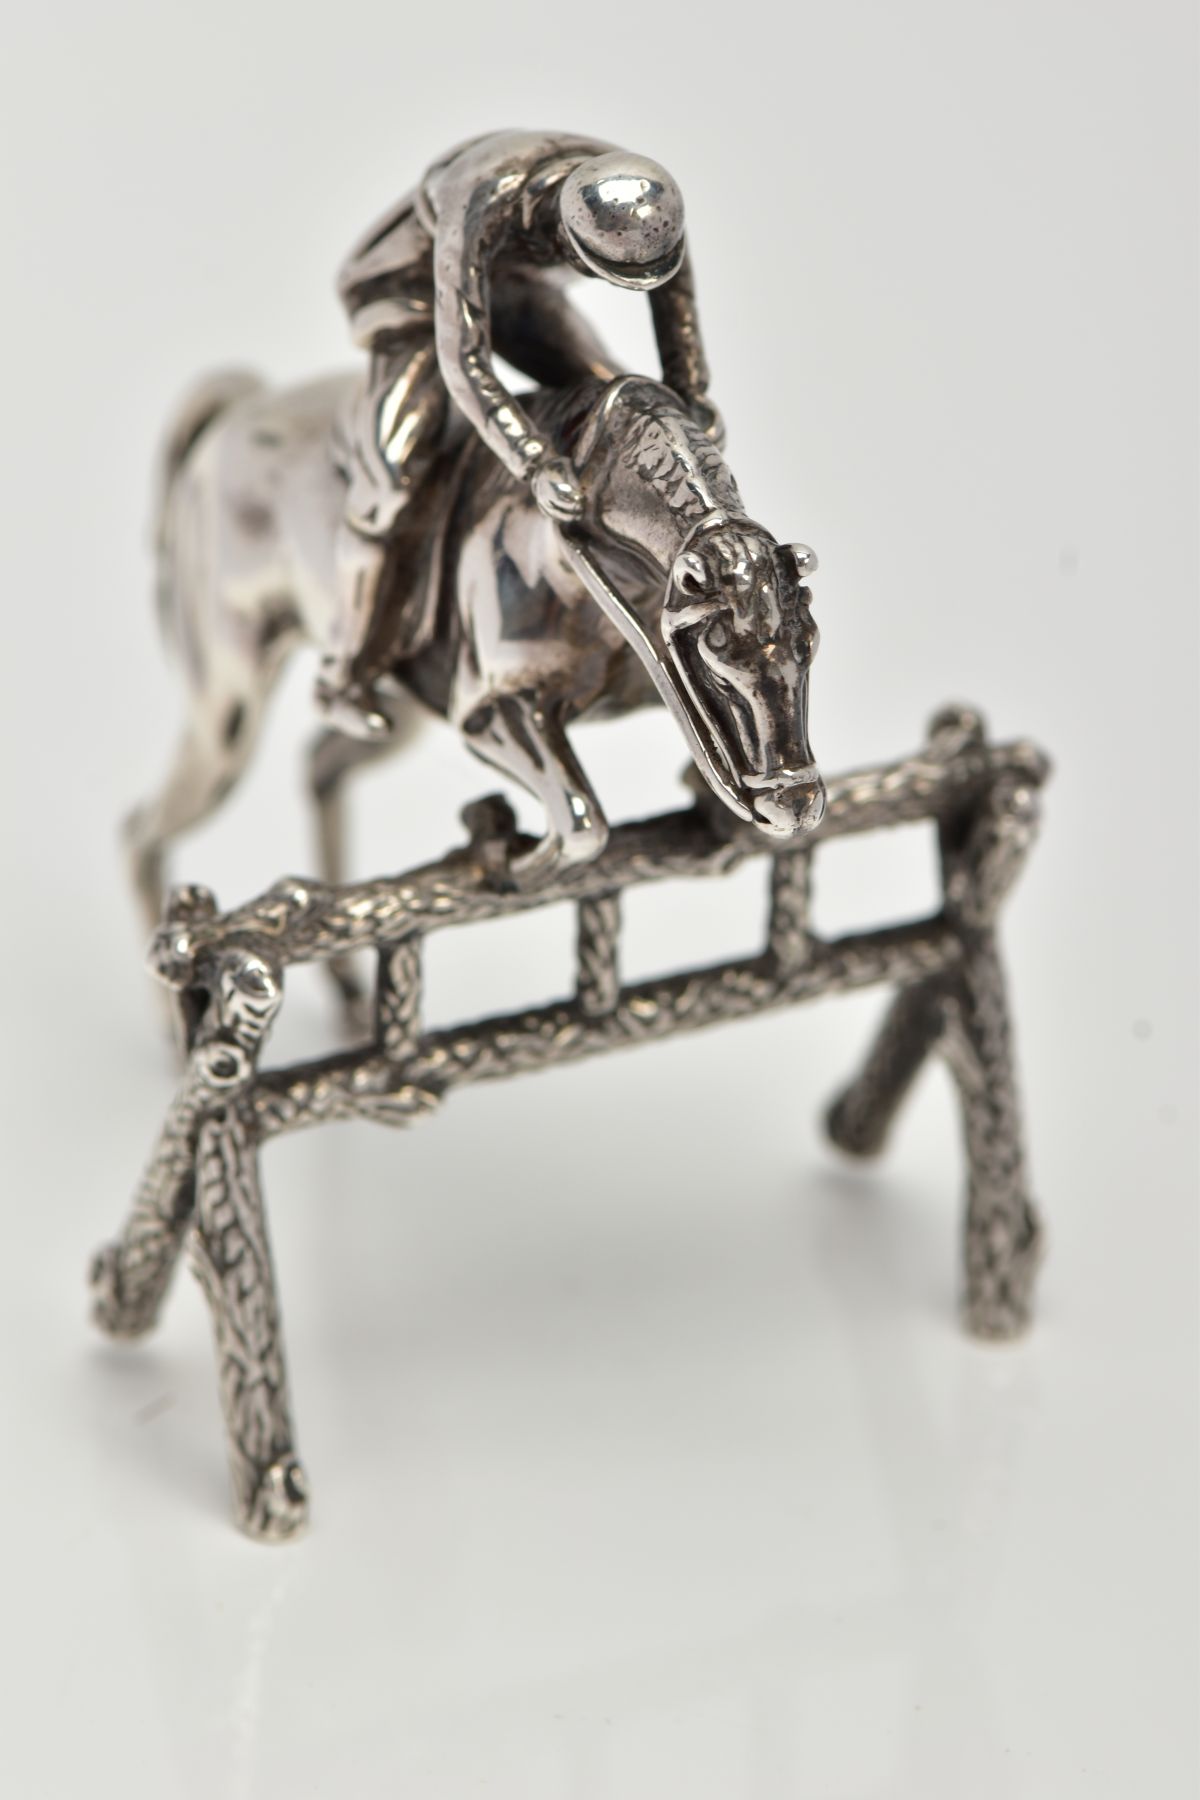 A SILVER SMALL HORSE AND JOCKEY ORNAMENT, measuring approximately 50mm in length x 70mm in height, - Image 2 of 7